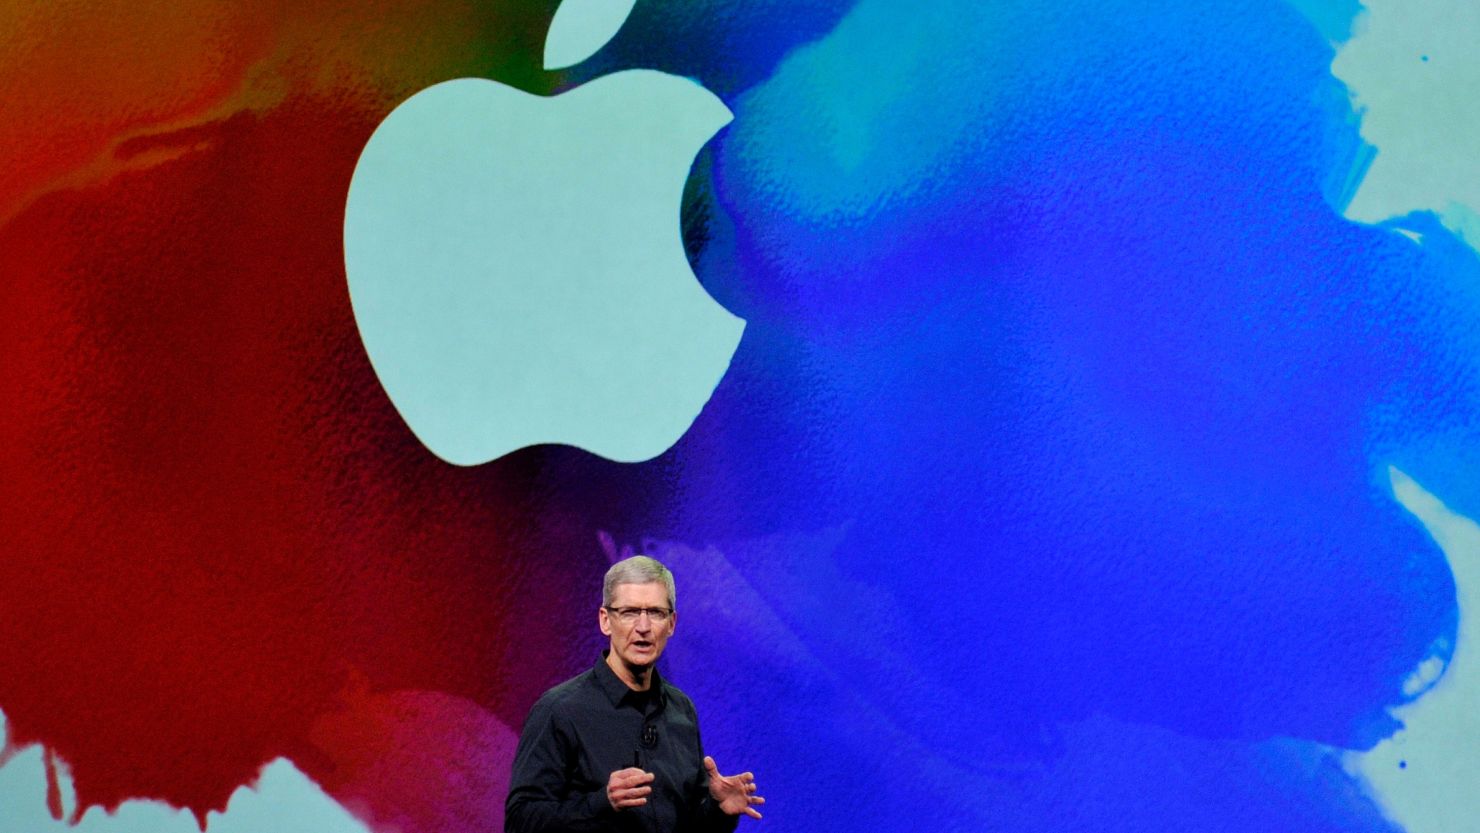 Apple CEO Tim Cook likely will introduce an iPhone 5 at Wednesday's event. But nobody knows for sure.